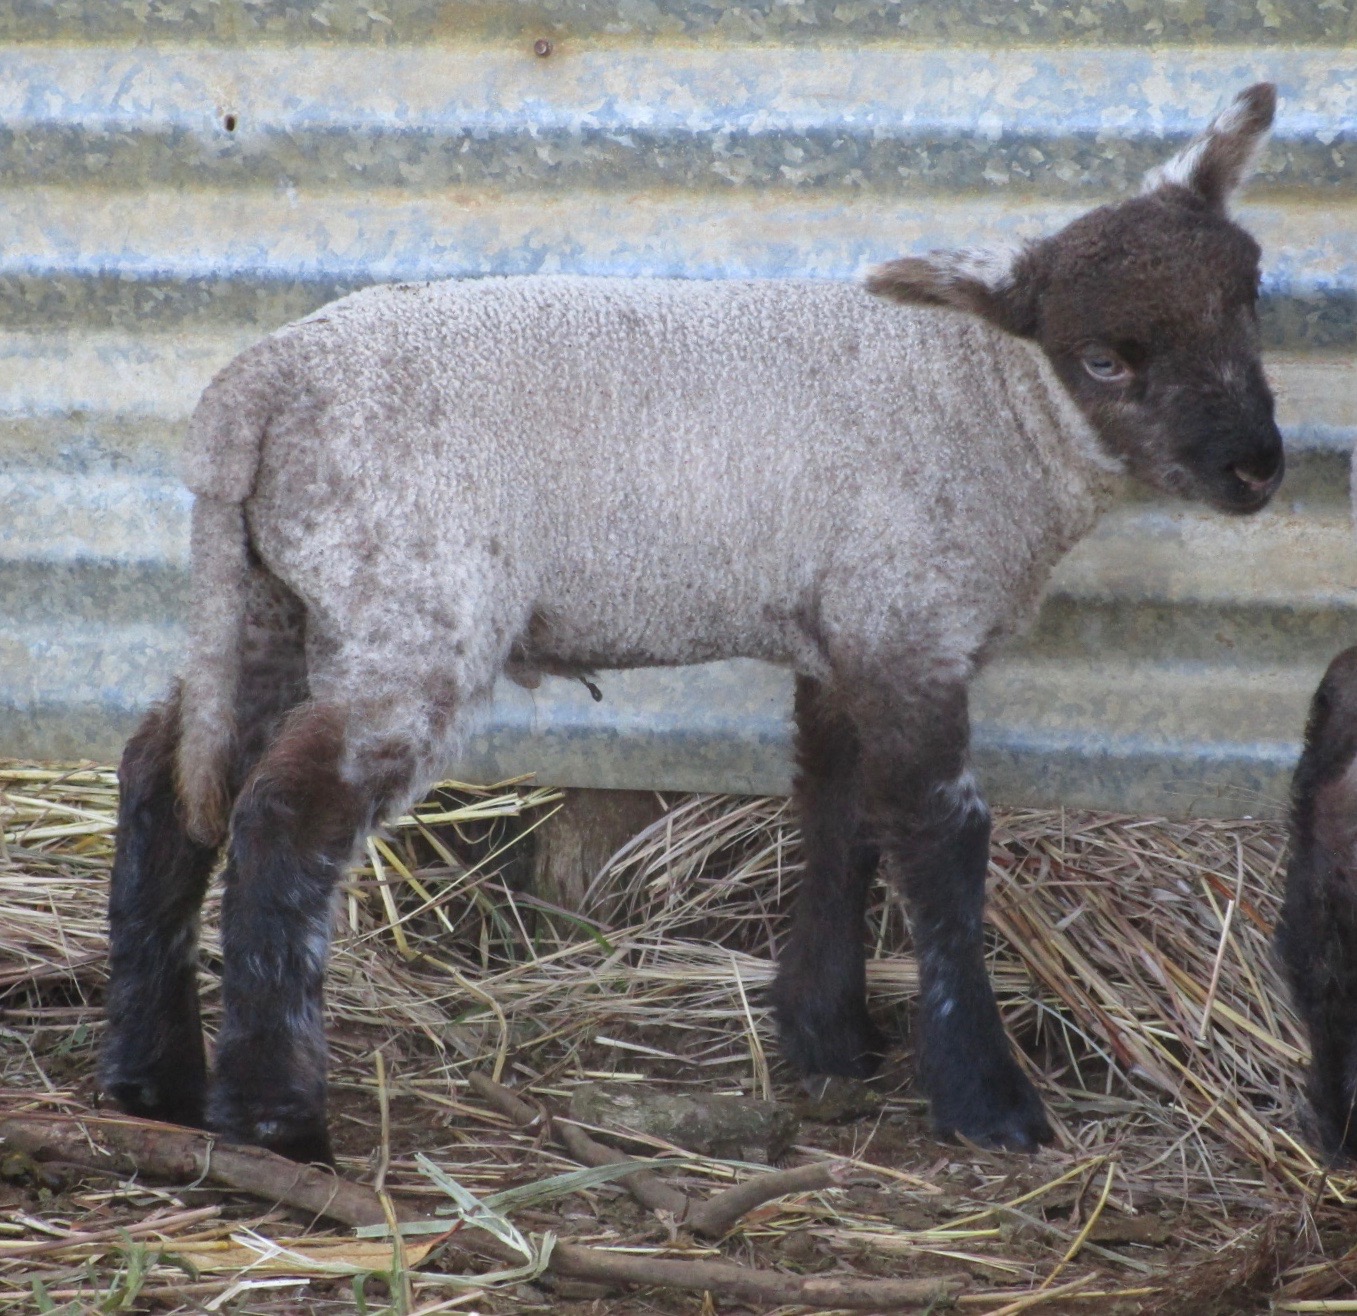 Ram#2 at 11 days old